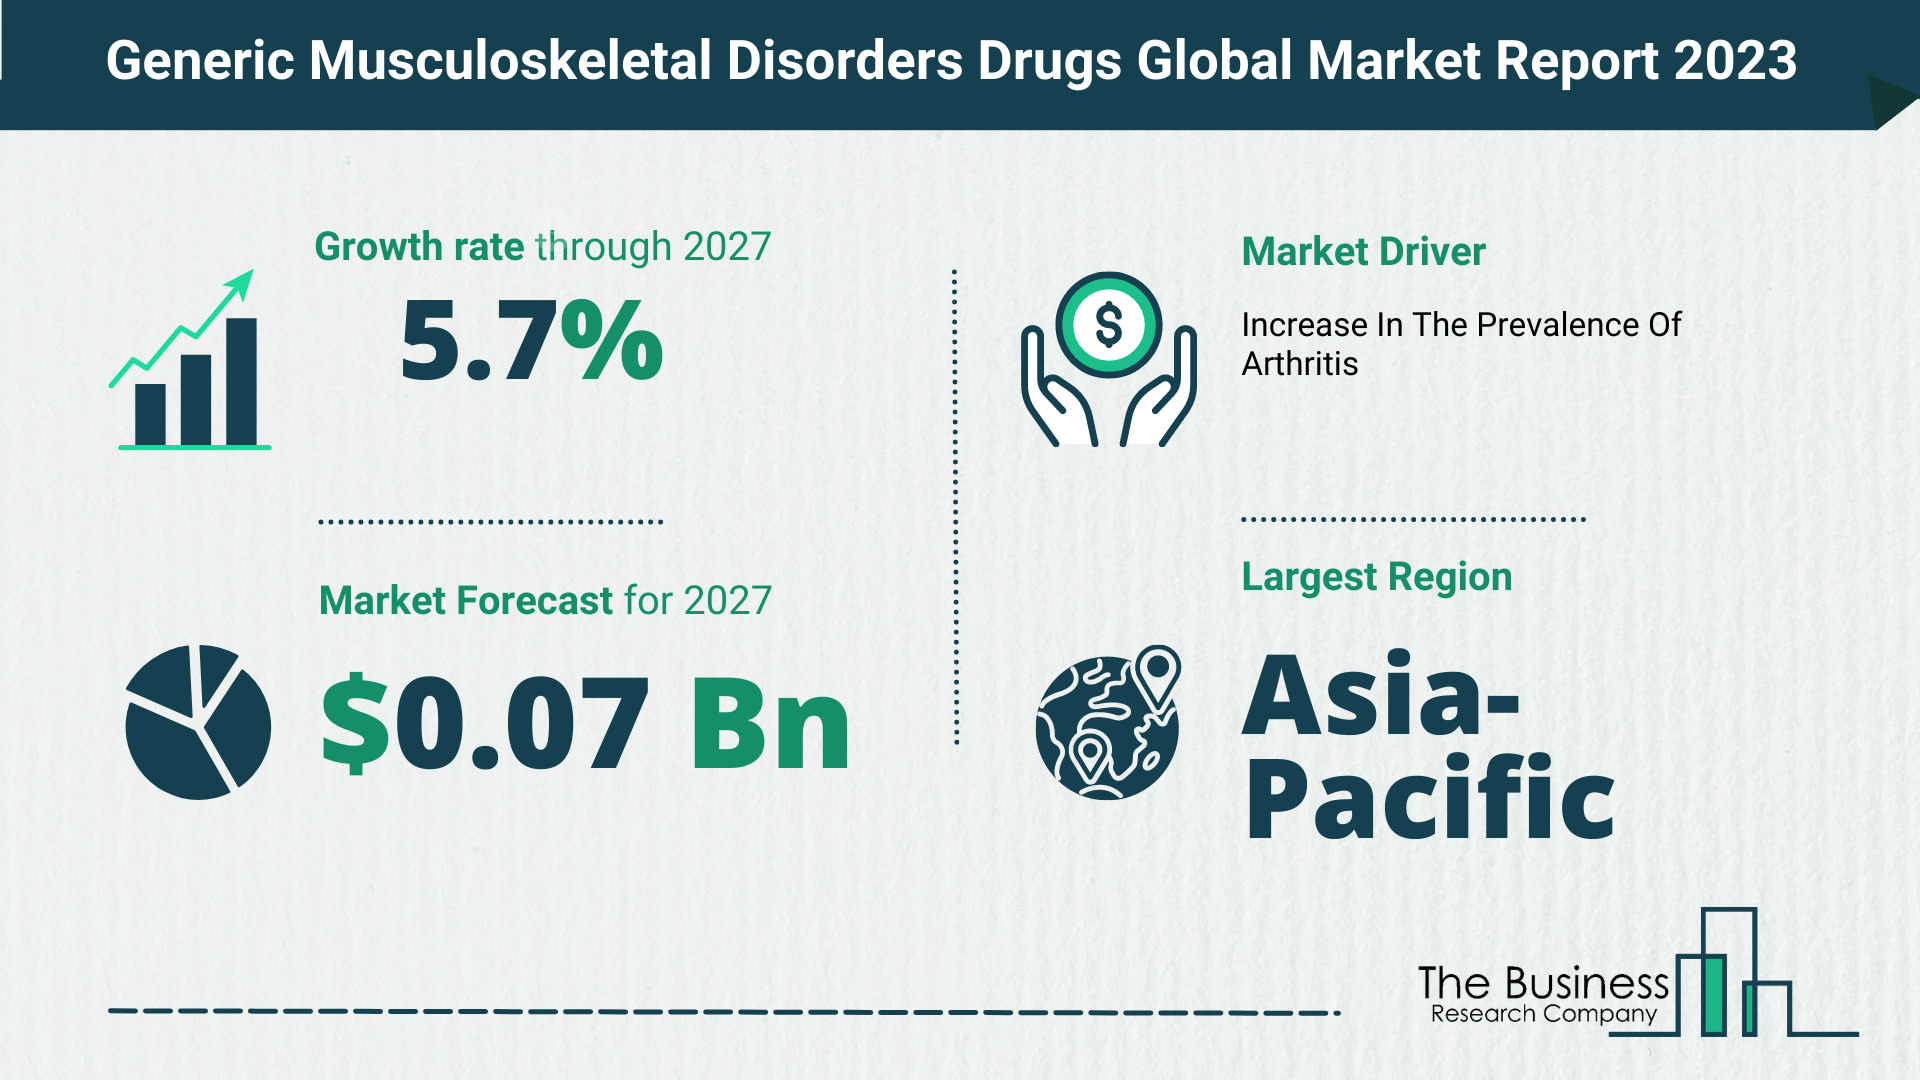 Global Generic Musculoskeletal Disorders Drugs Market Opportunities And Strategies 2023